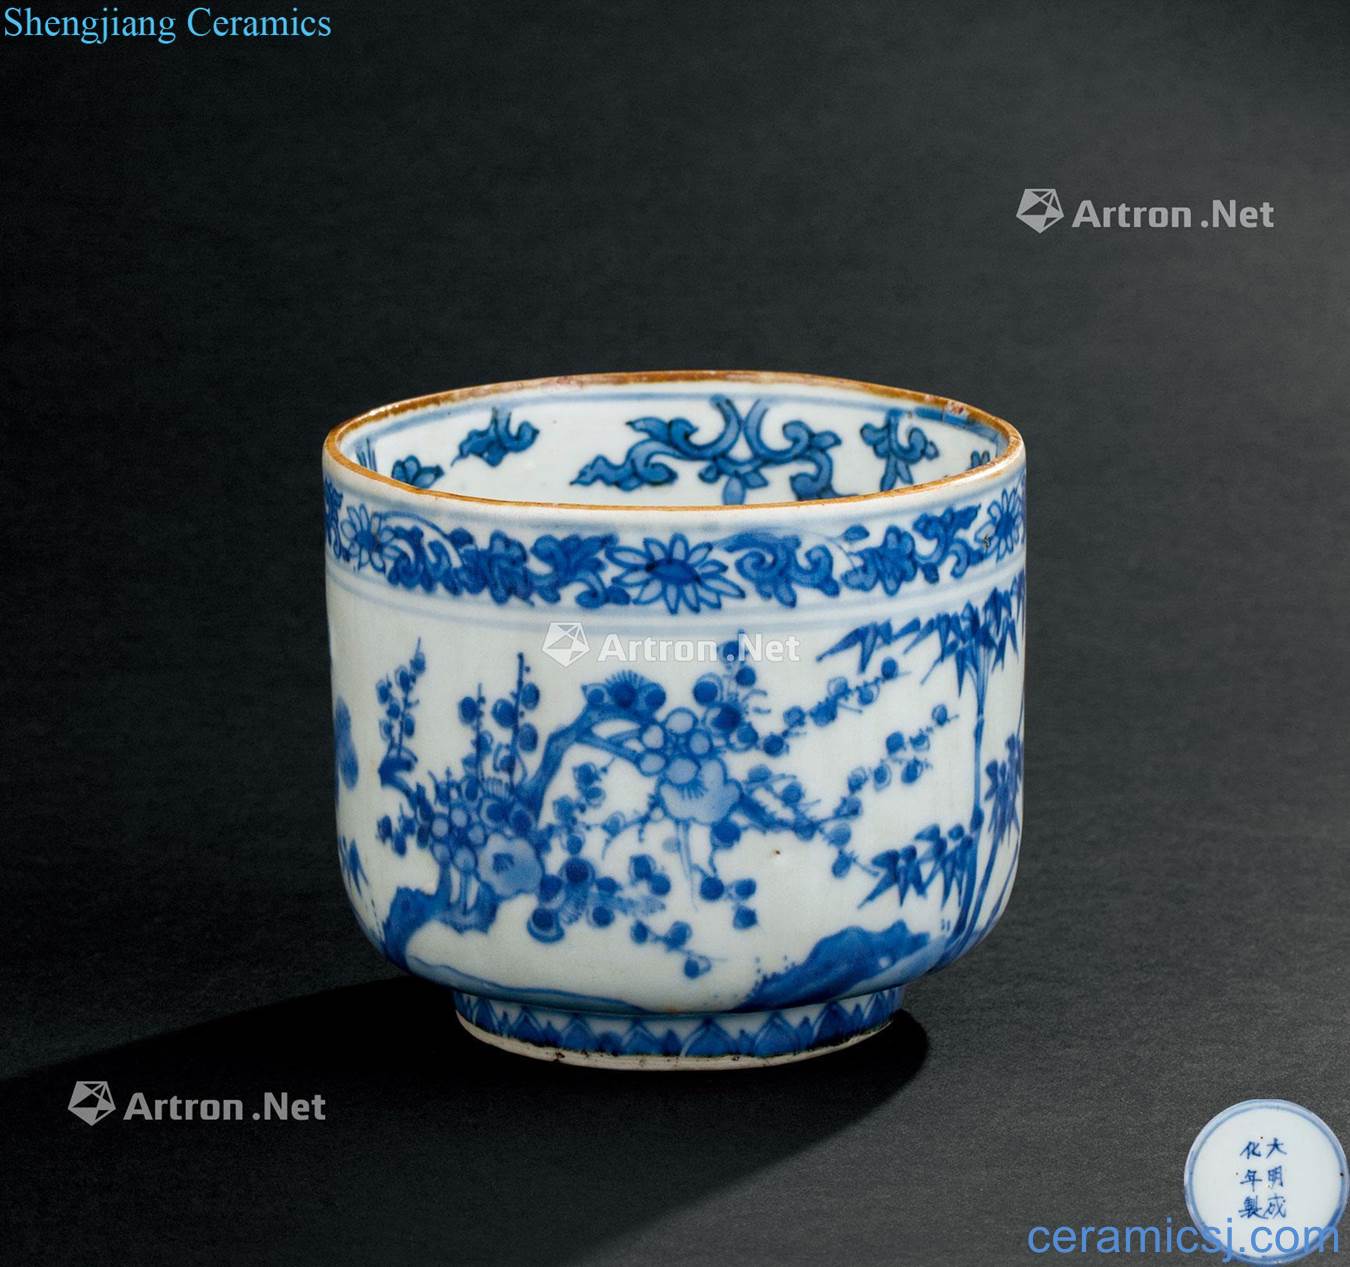 In the Ming dynasty (1368-1644) blue and white, poetic WenXiangLu